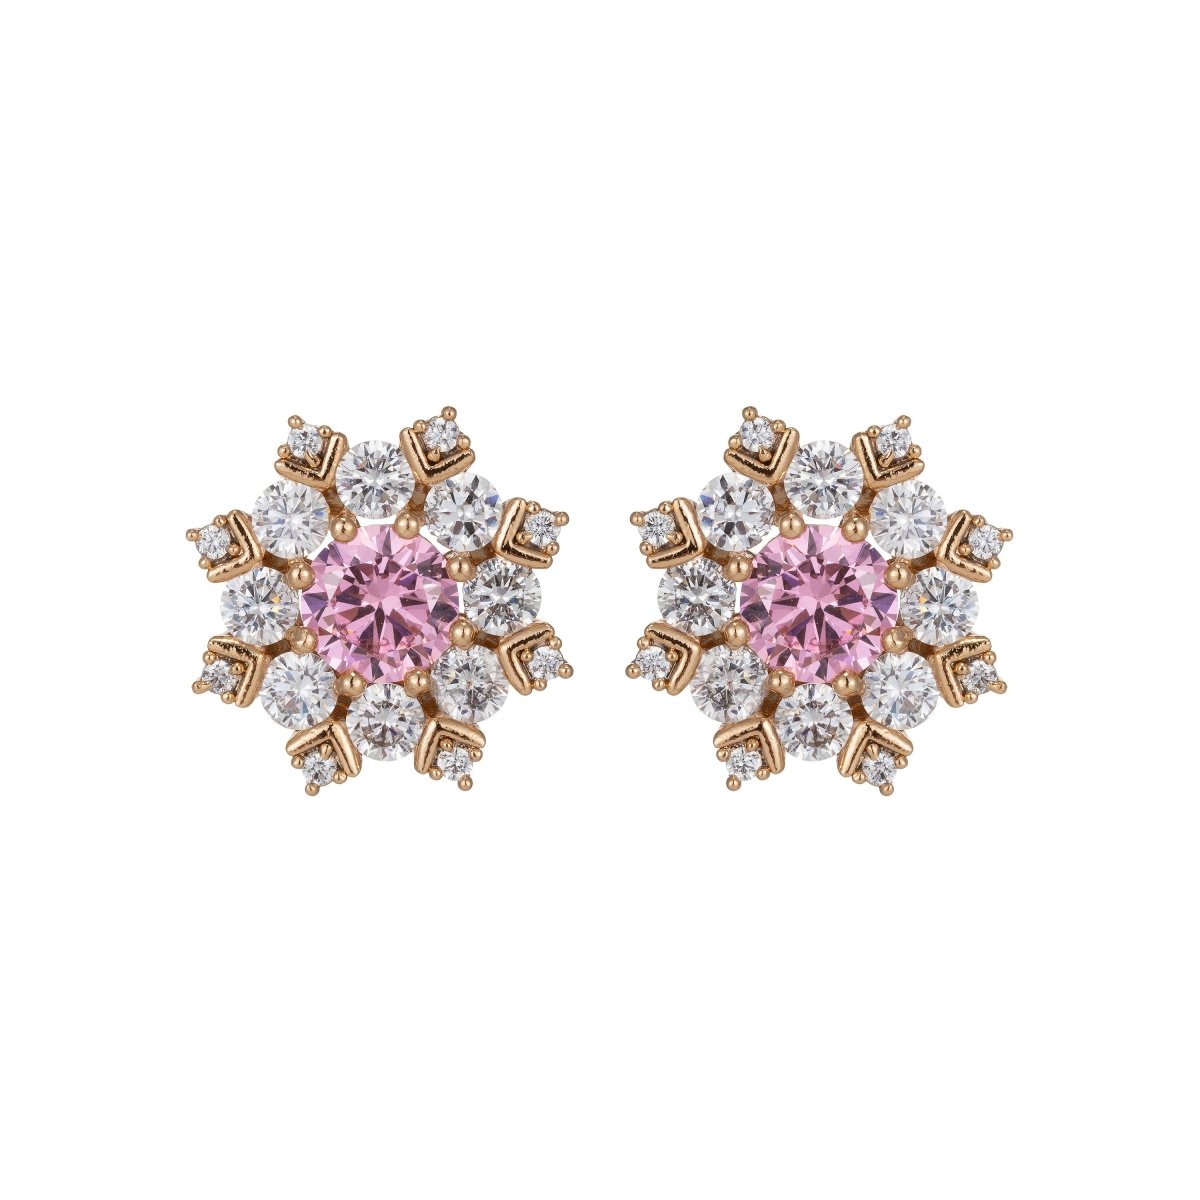 Topaz Snowflake Stud Earrings Gold Filled Cz Snowflakes Earrings Pink Stud Earrings Wedding Jewelry Best friend Gift for her Q-020 - DLUXCA